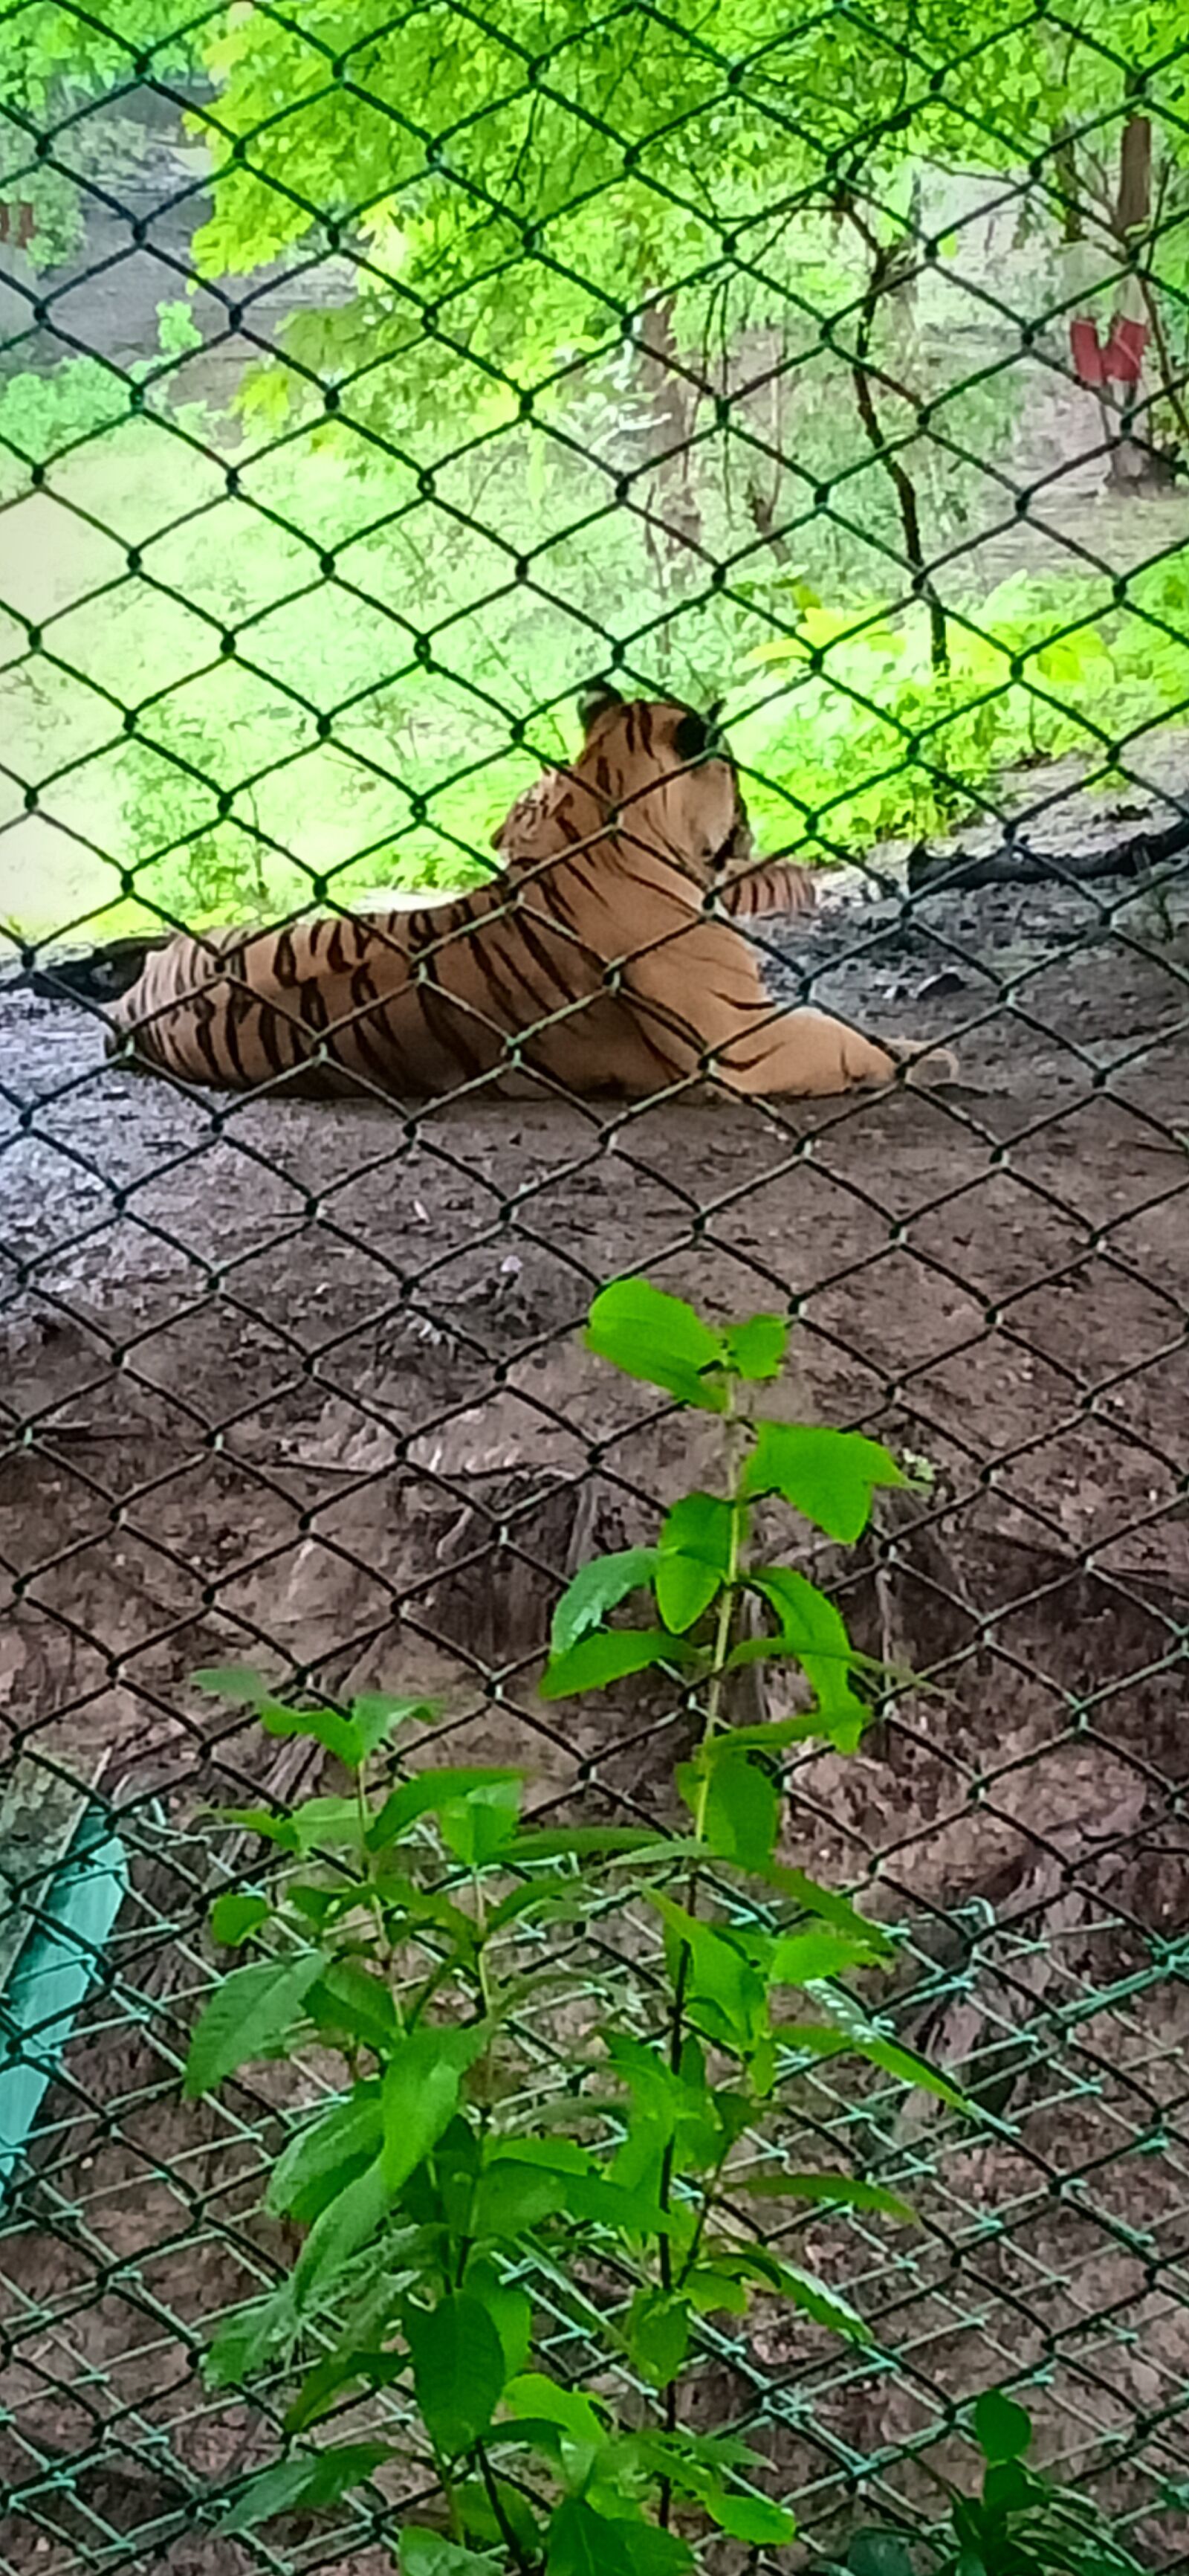 OPPO F9 sample photo. Zoo, tiger, animal photography